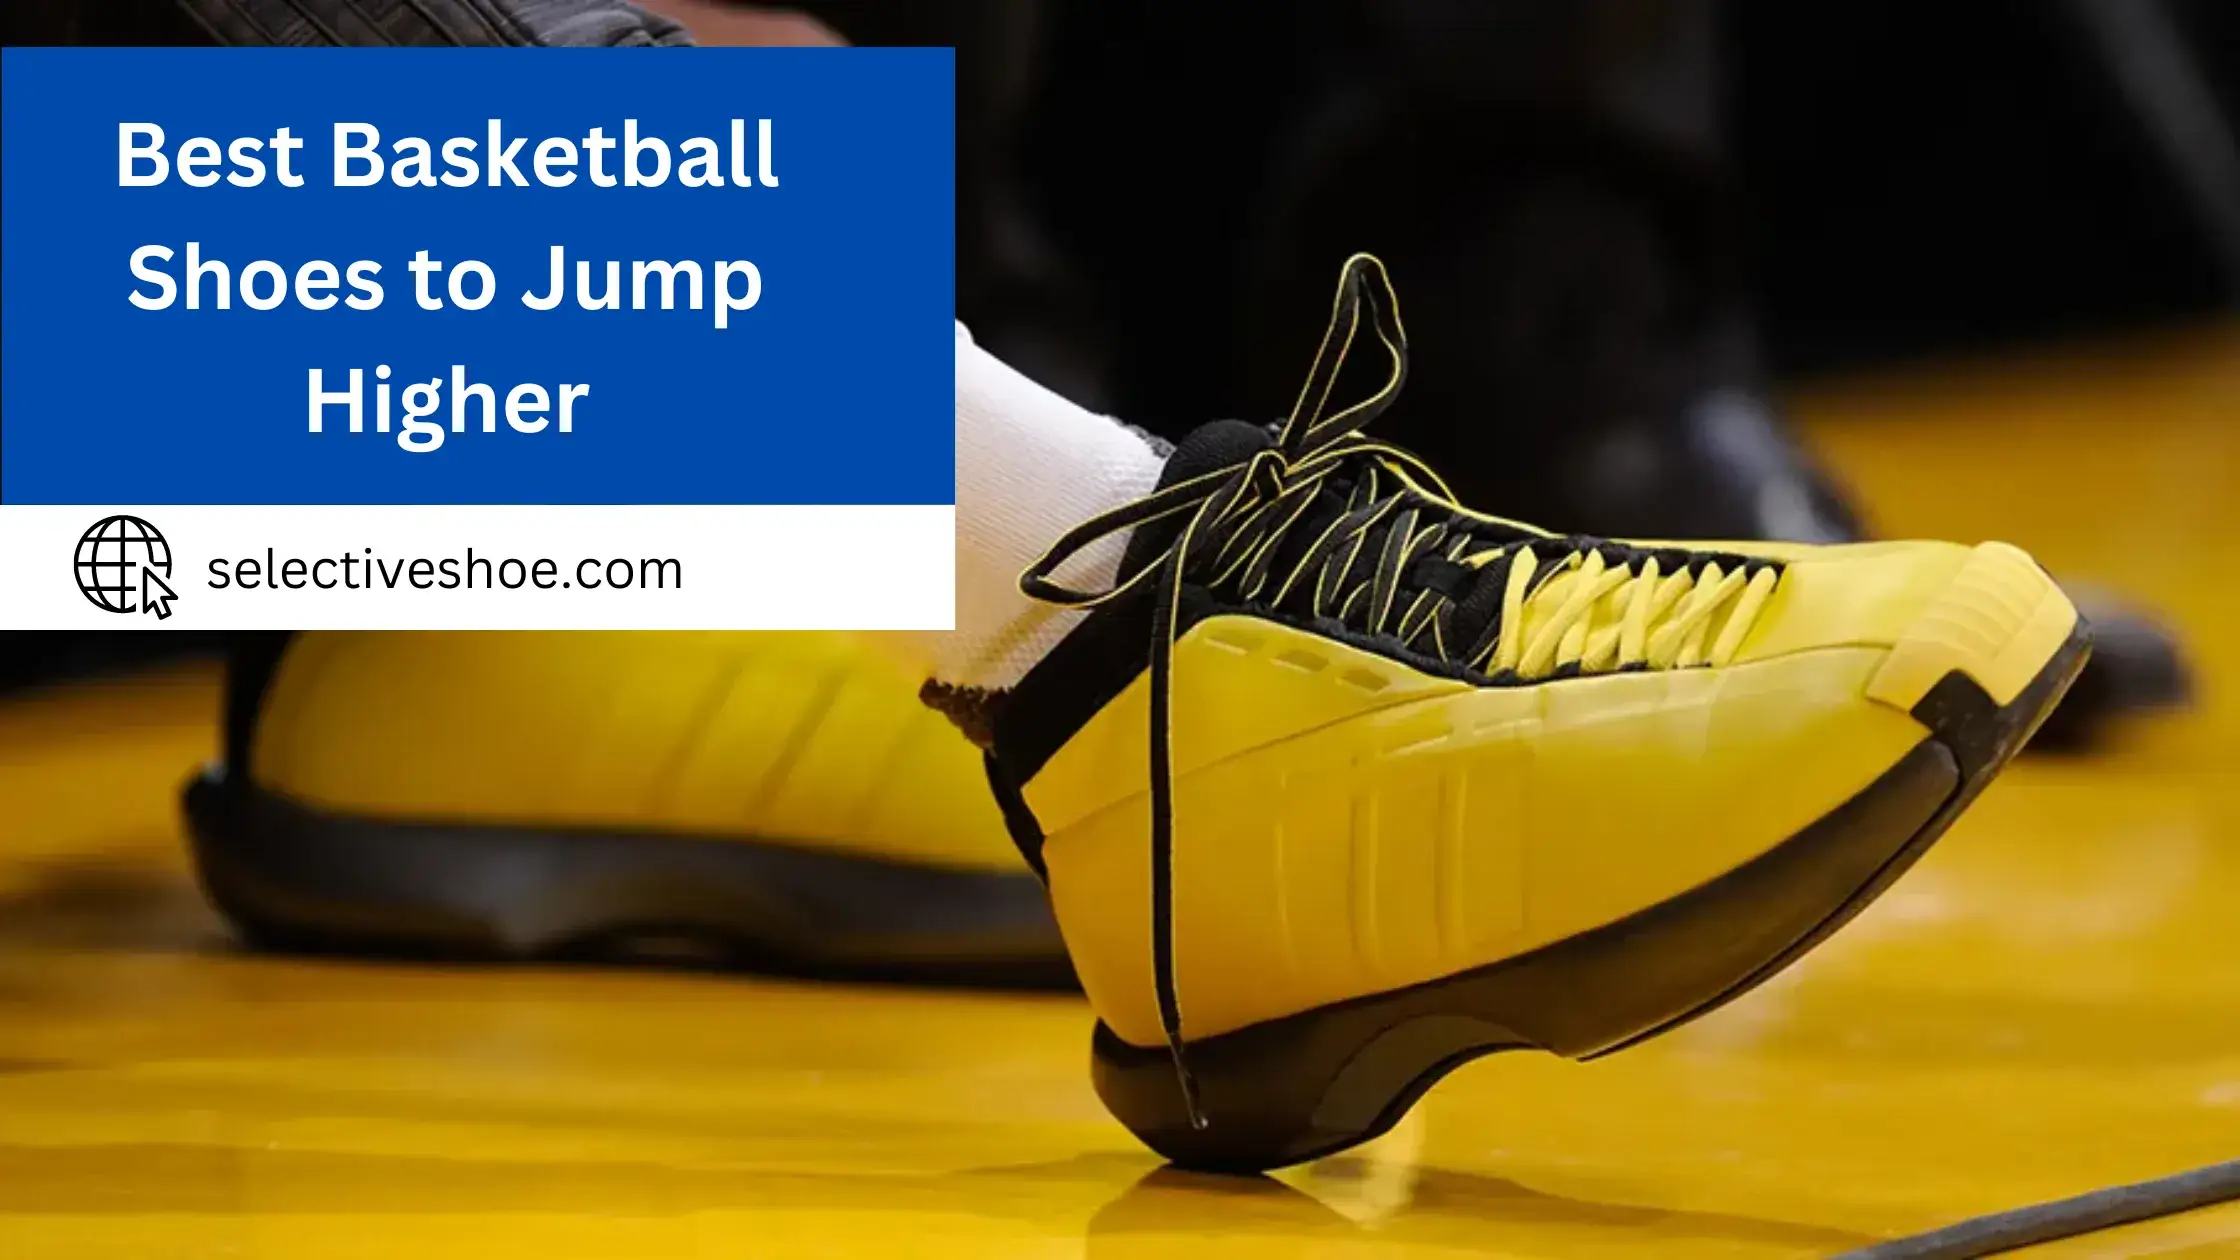 Revealing Top 10 Best Basketball Shoes to Jump Higher